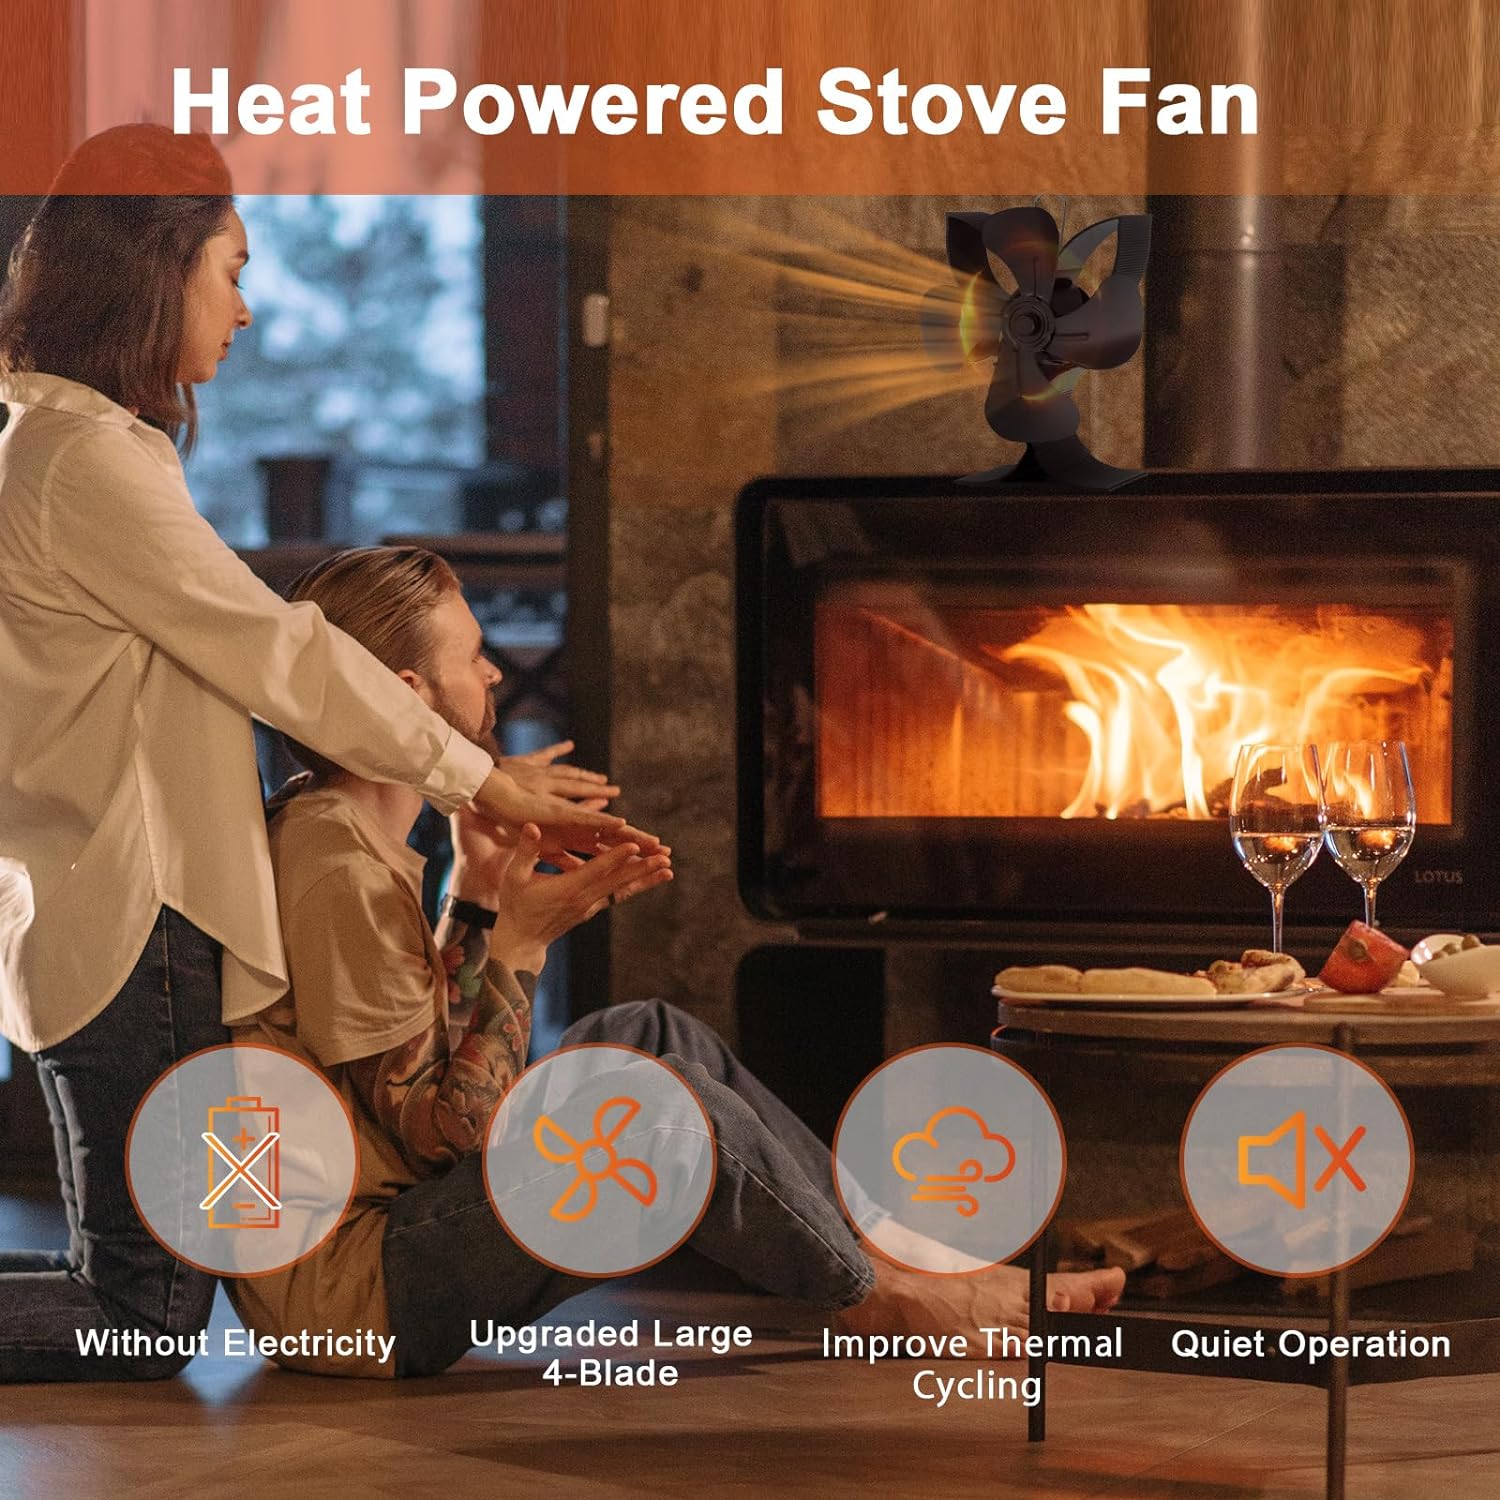 Miaton Heat Powered Wood Stove Fan and Mr Buddy Heater Fan for Little Buddy and Big Buddy (Included Bracket  Thermometer), Non Electric Fireplace Fan Eco fan Thermal Fan Thermoelectric Fan - Miaton Heat Powered Wood Stove Fan Review